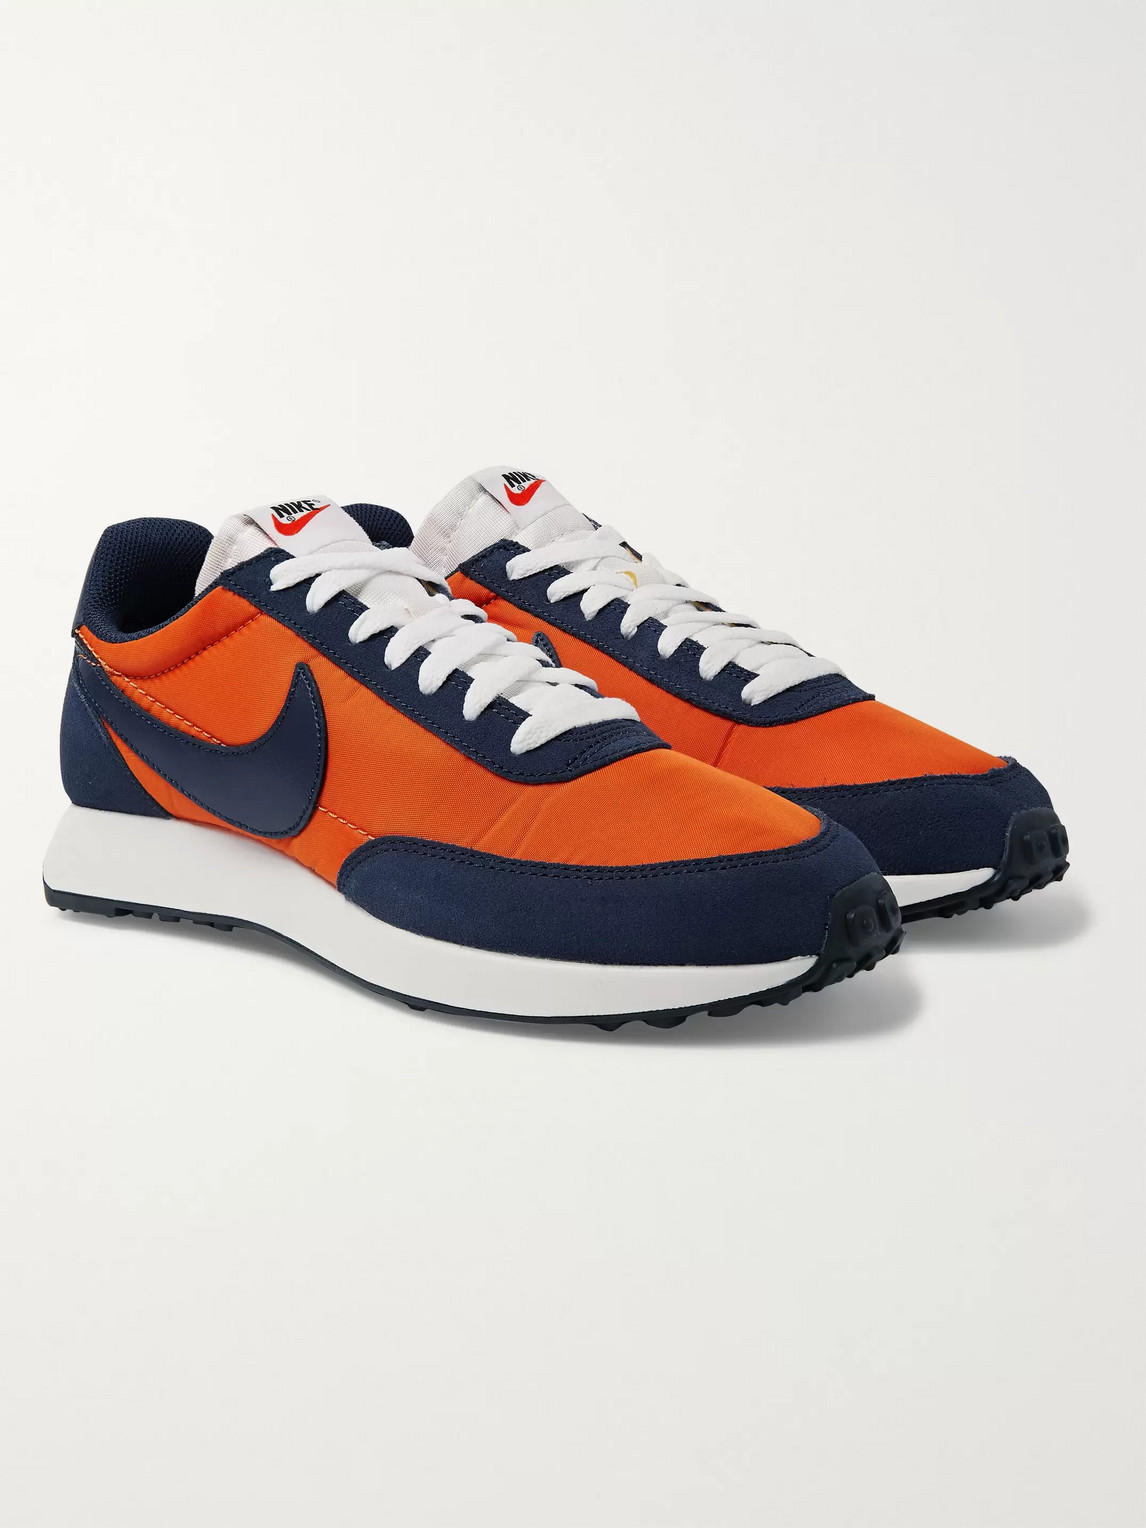 NIKE AIR TAILWIND 79 SHELL, SUEDE AND LEATHER SNEAKERS